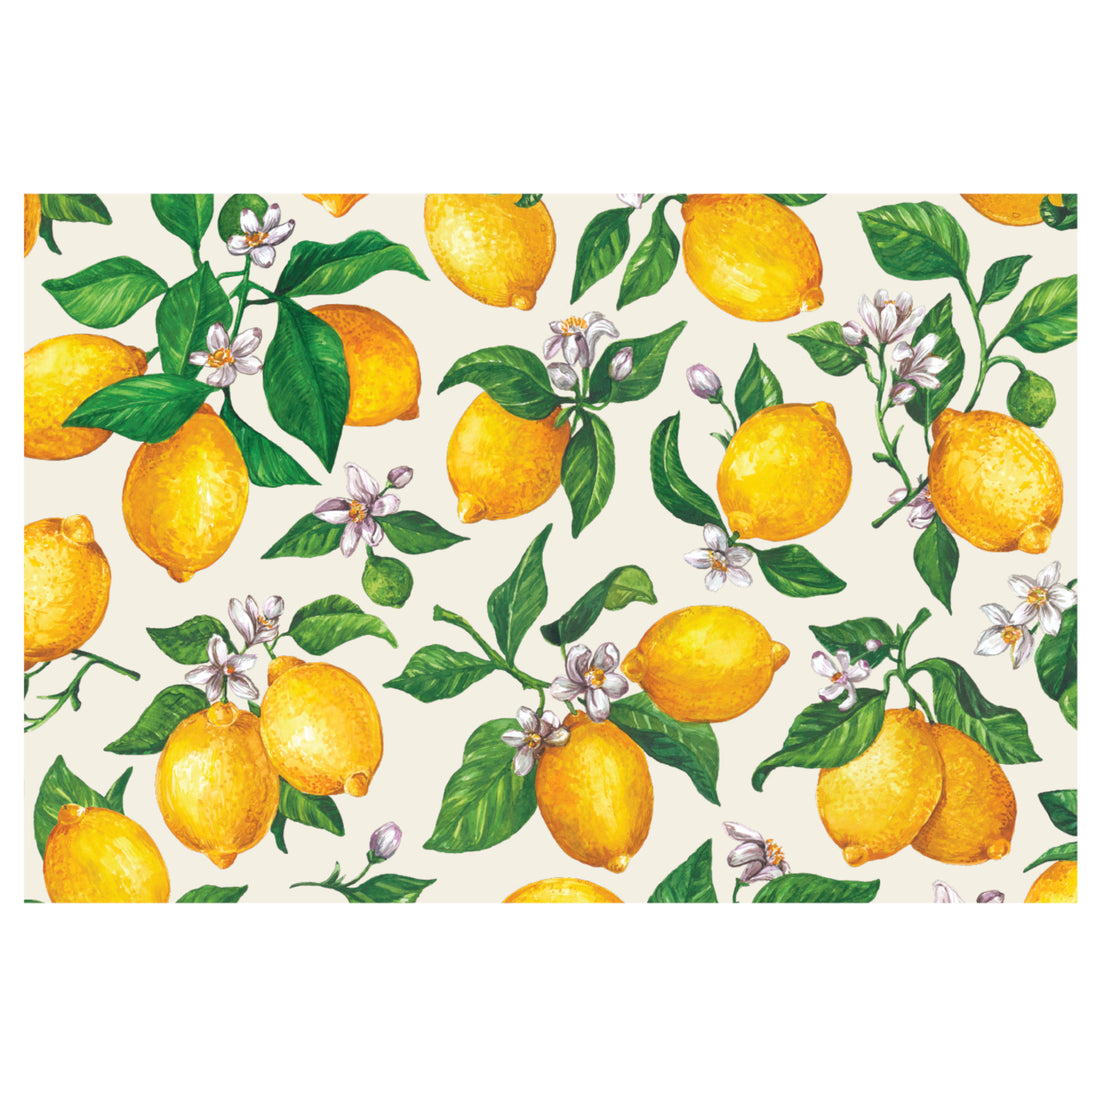 An illustrated scatter of vibrant yellow lemons with green leaves and white blossoms, over a white background.